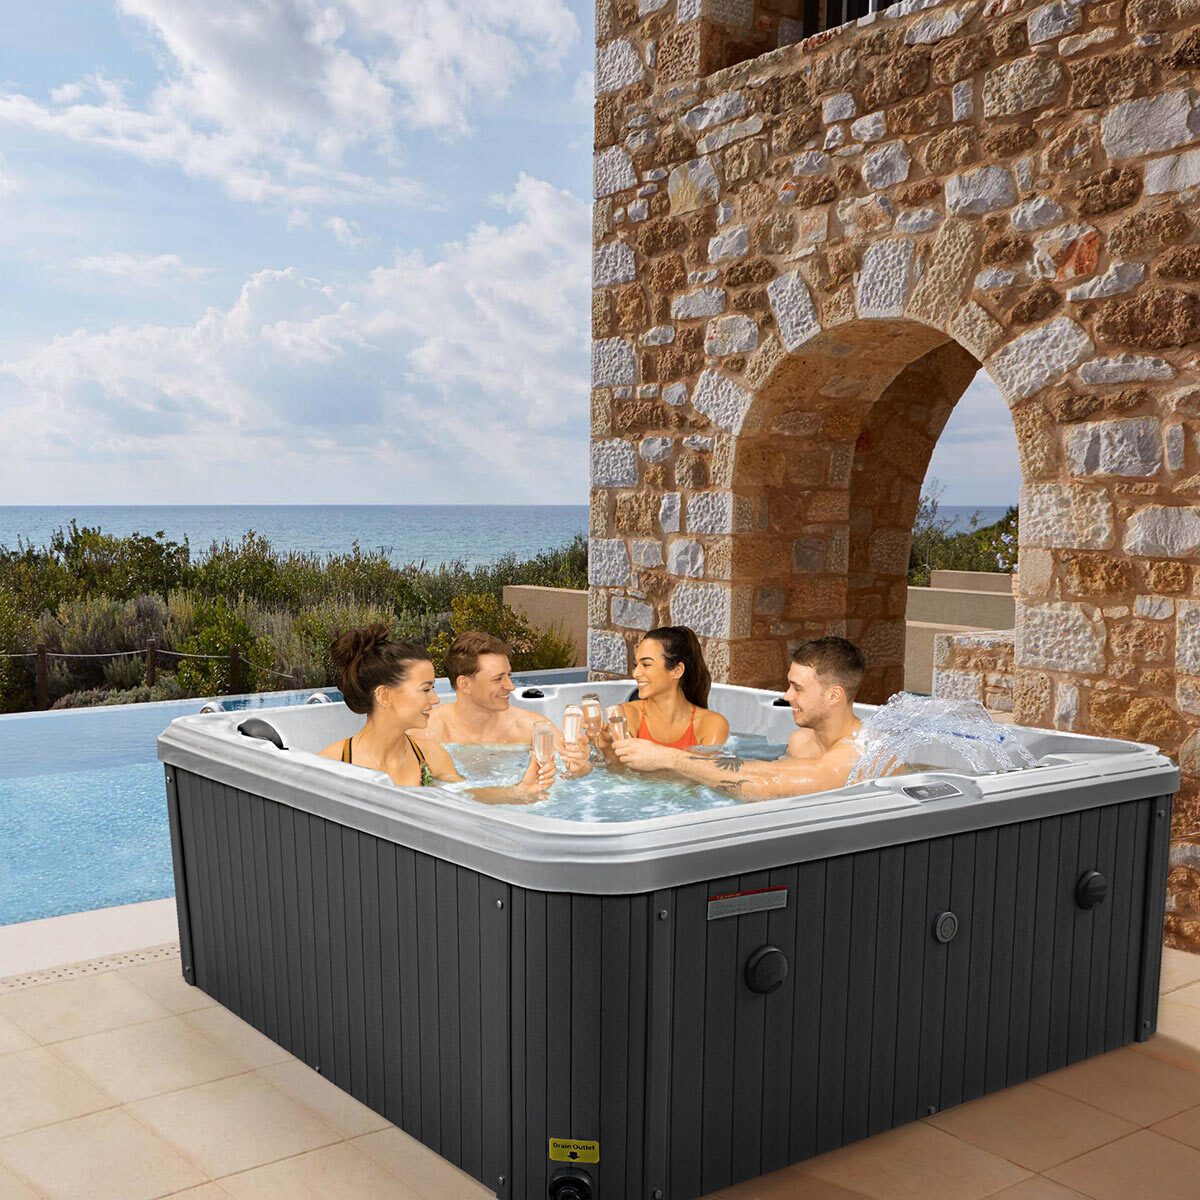 Blue Whale Spa Olive Bay 54-Jet 6 Person Hot Tub - Delivered and Installed - Signature Retail Stores